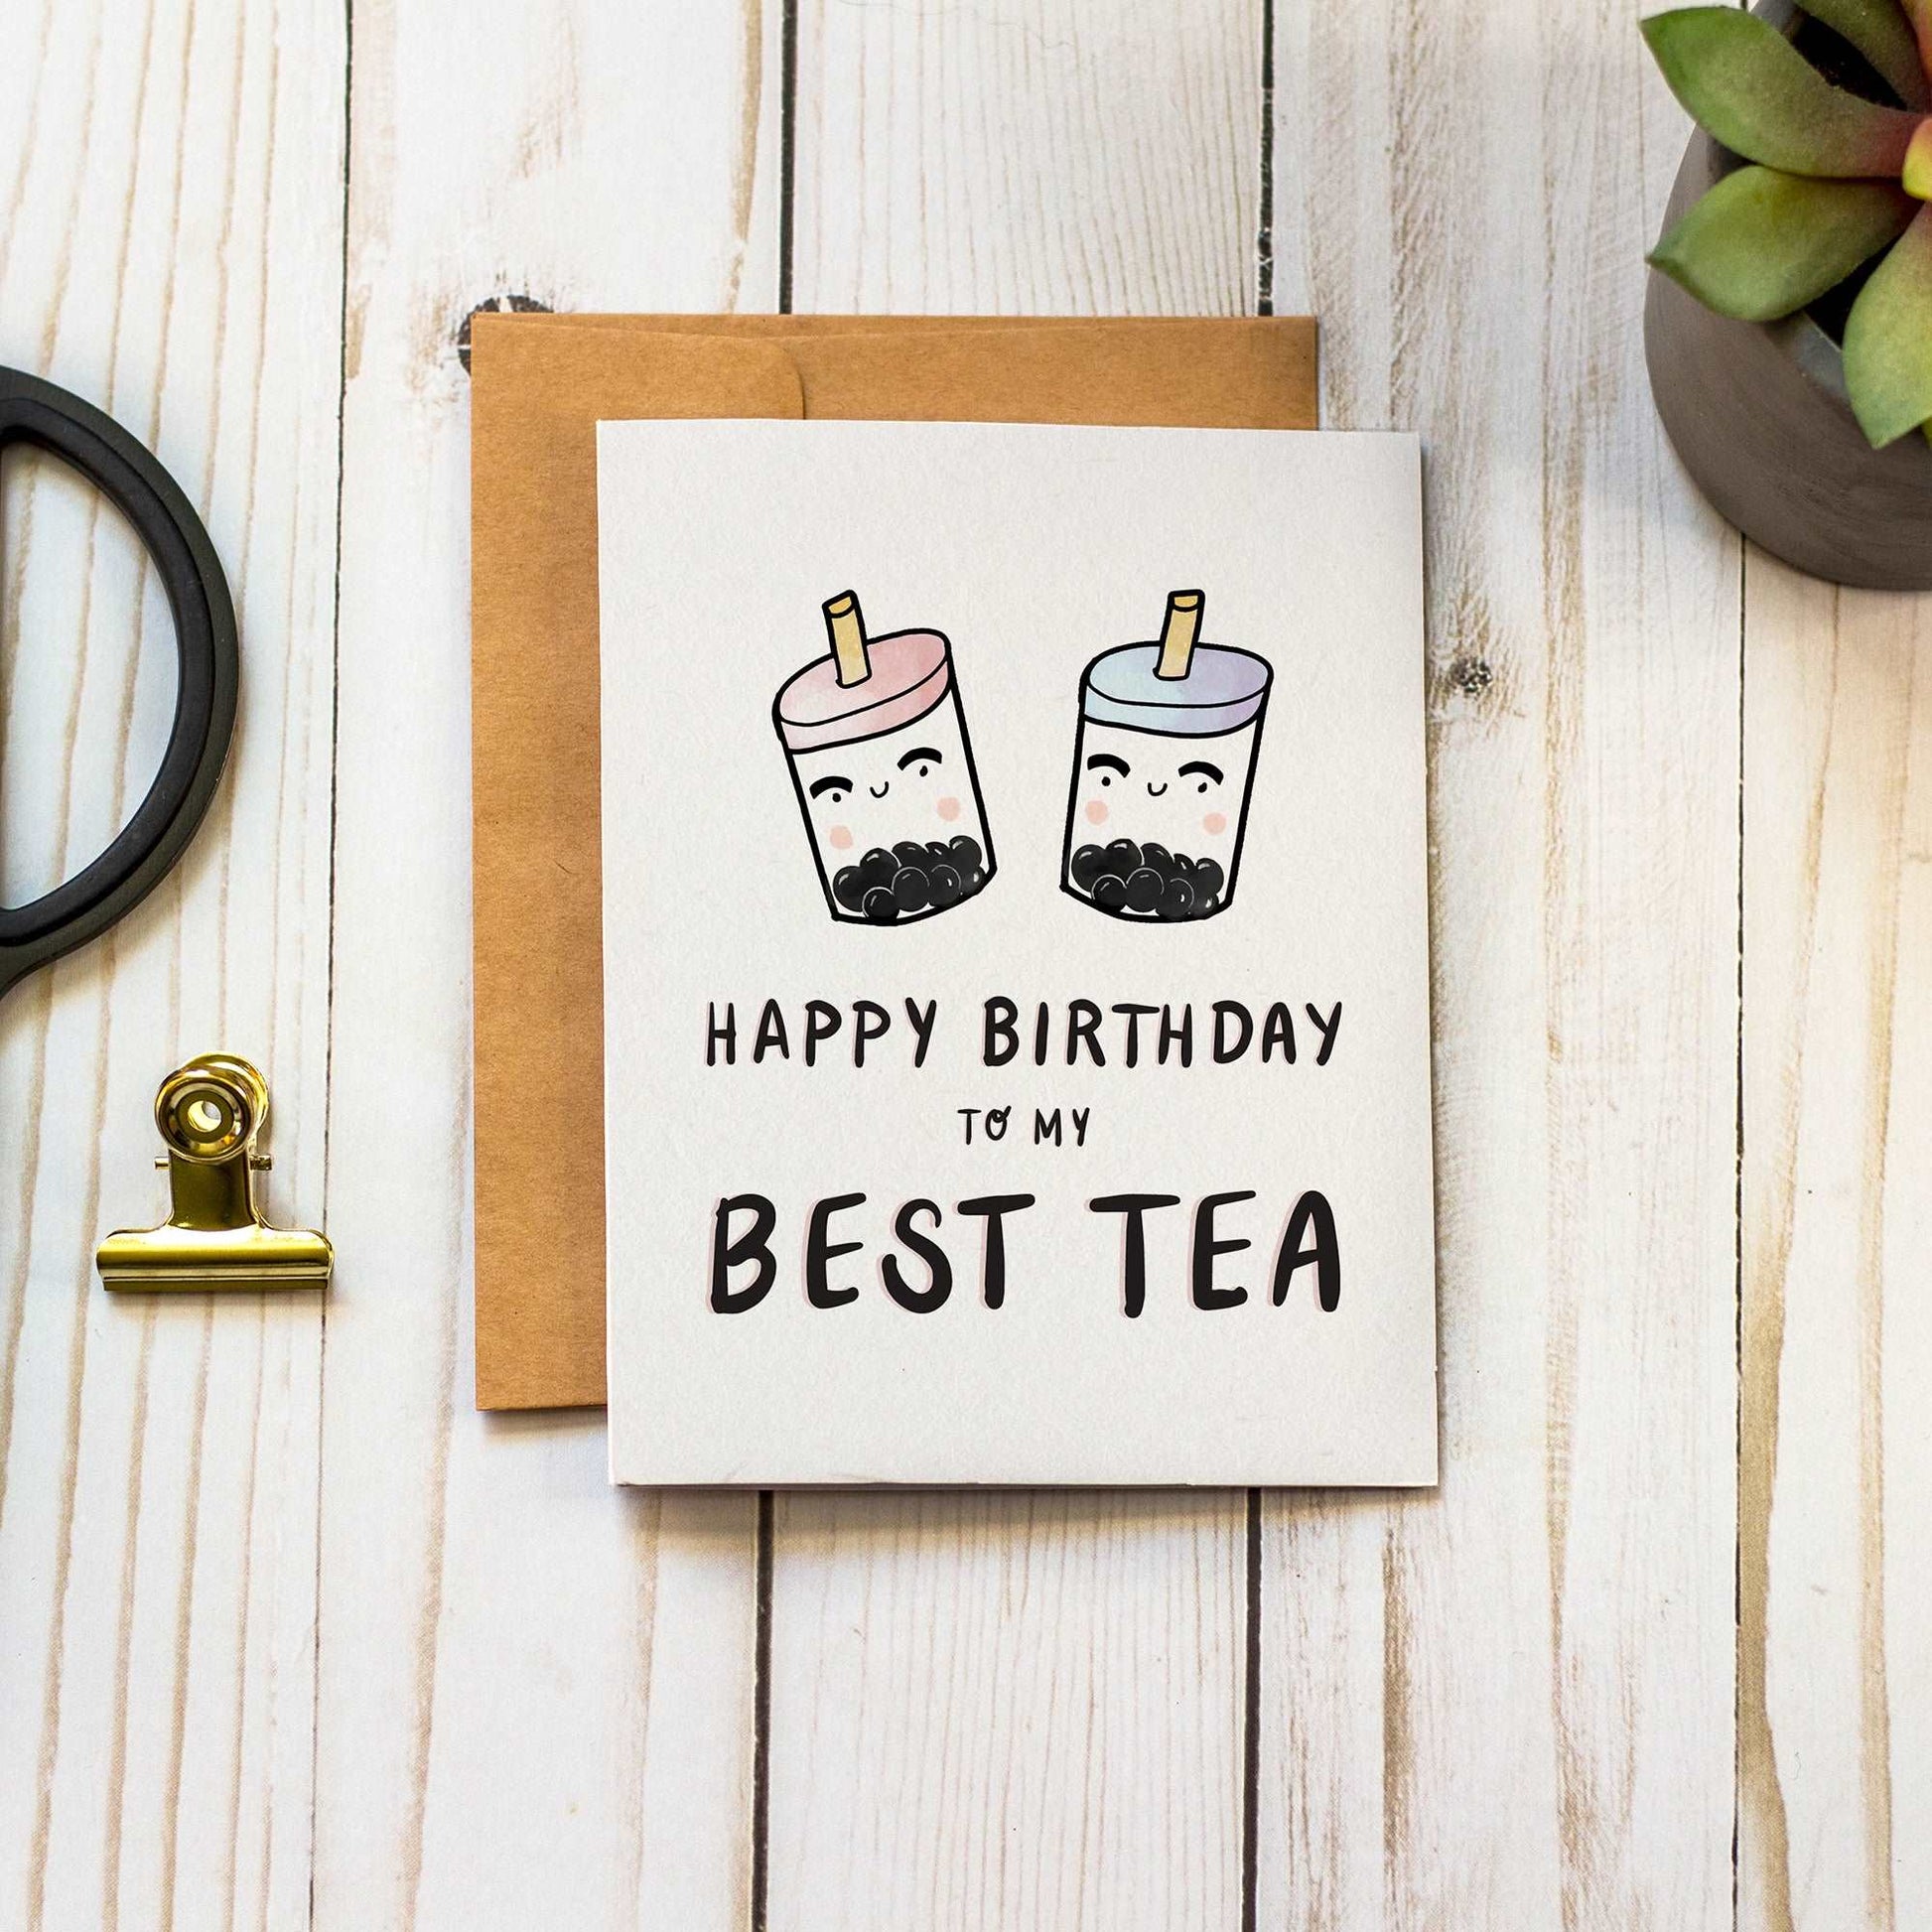 Habitude Paper Happy Birthday to My Best Tea - Birthday Greeting Card for Best Friend, Sister, BFF